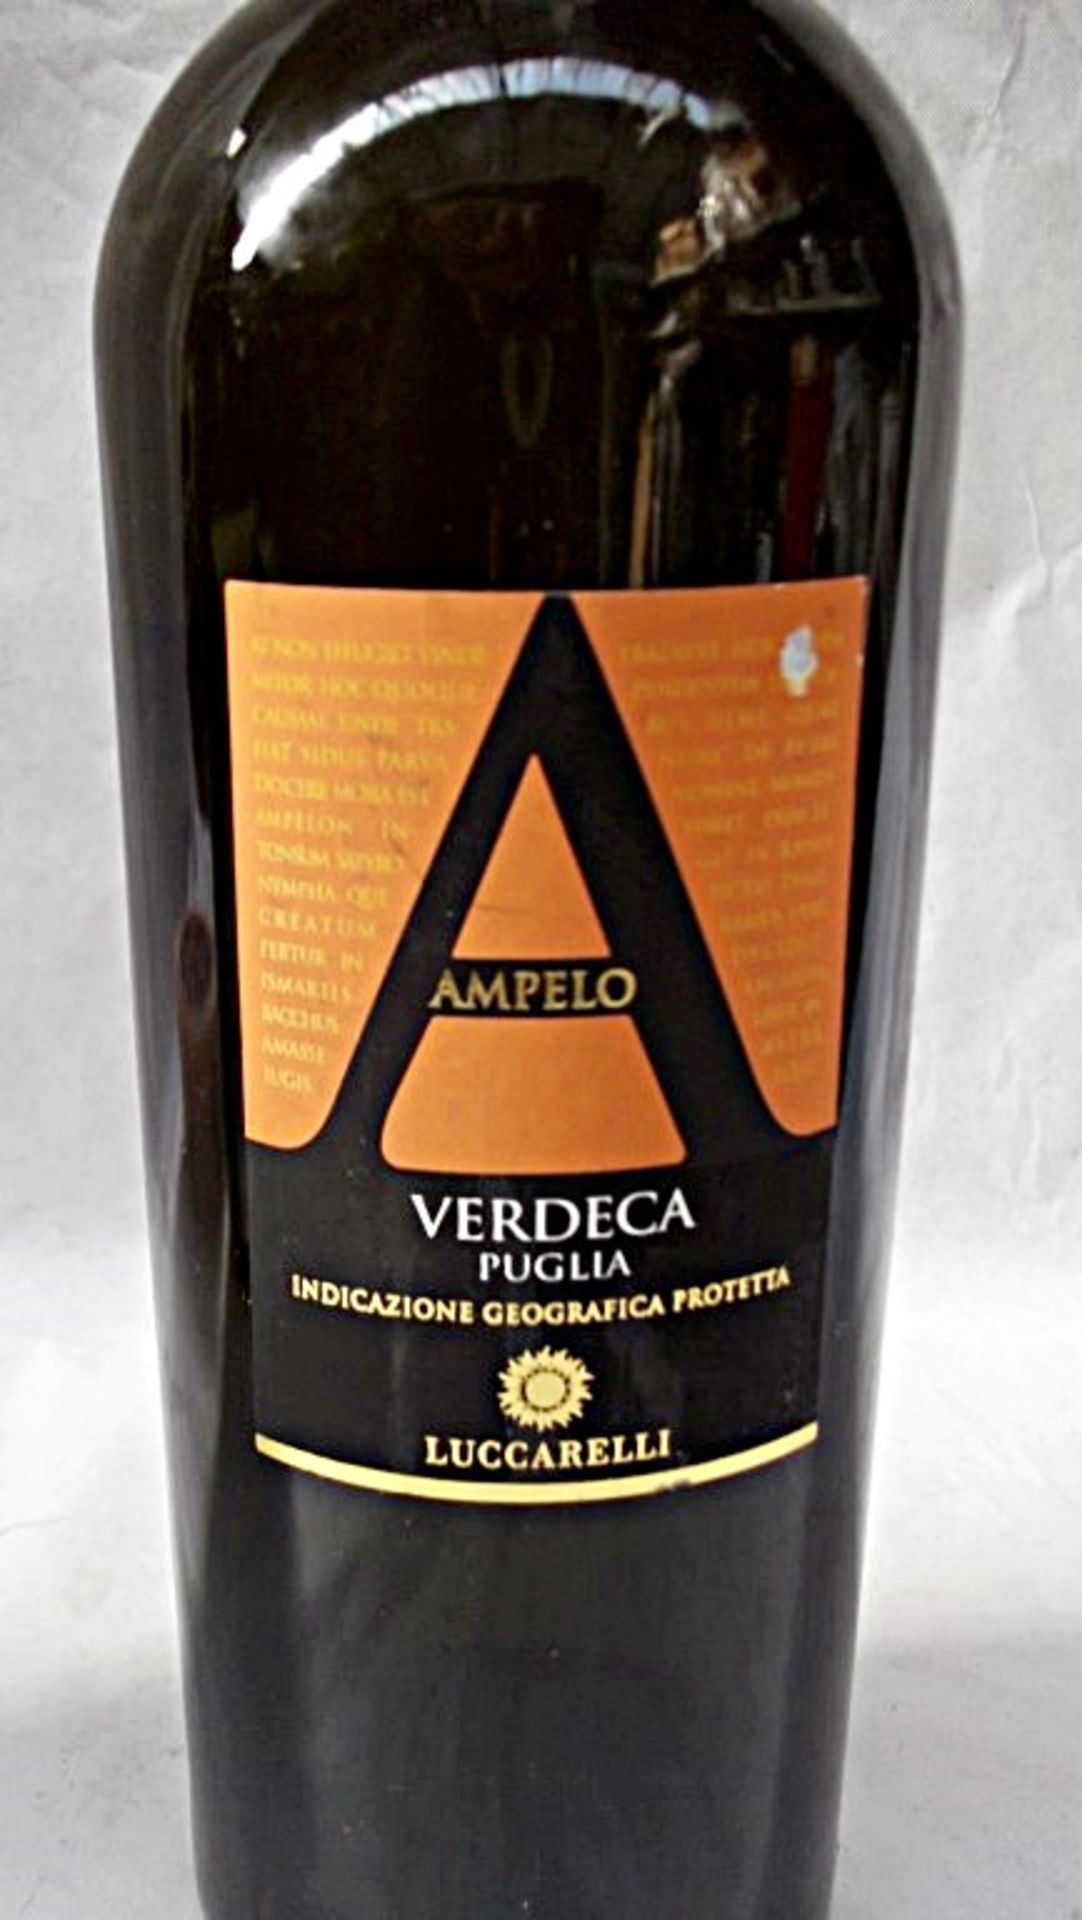 1 x Luccarelli Ampelo Verdeca Puglia IGT, Italy – 2012 - Bottle Size 75cl - Volume 12% - Ref W1080 - - Image 2 of 3